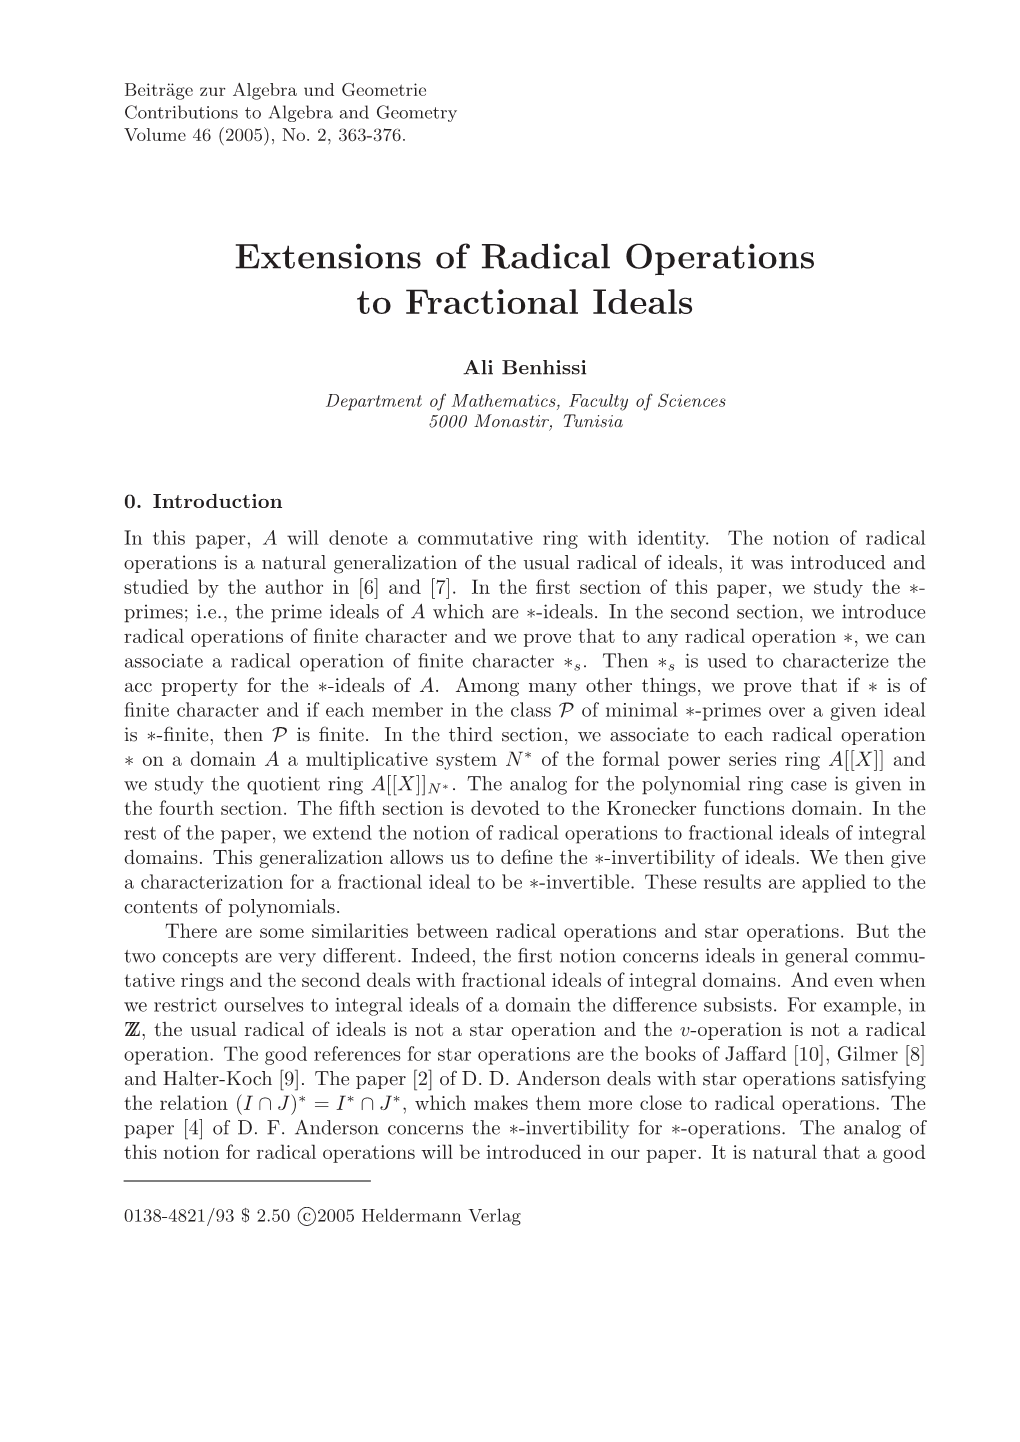 Extensions of Radical Operations to Fractional Ideals